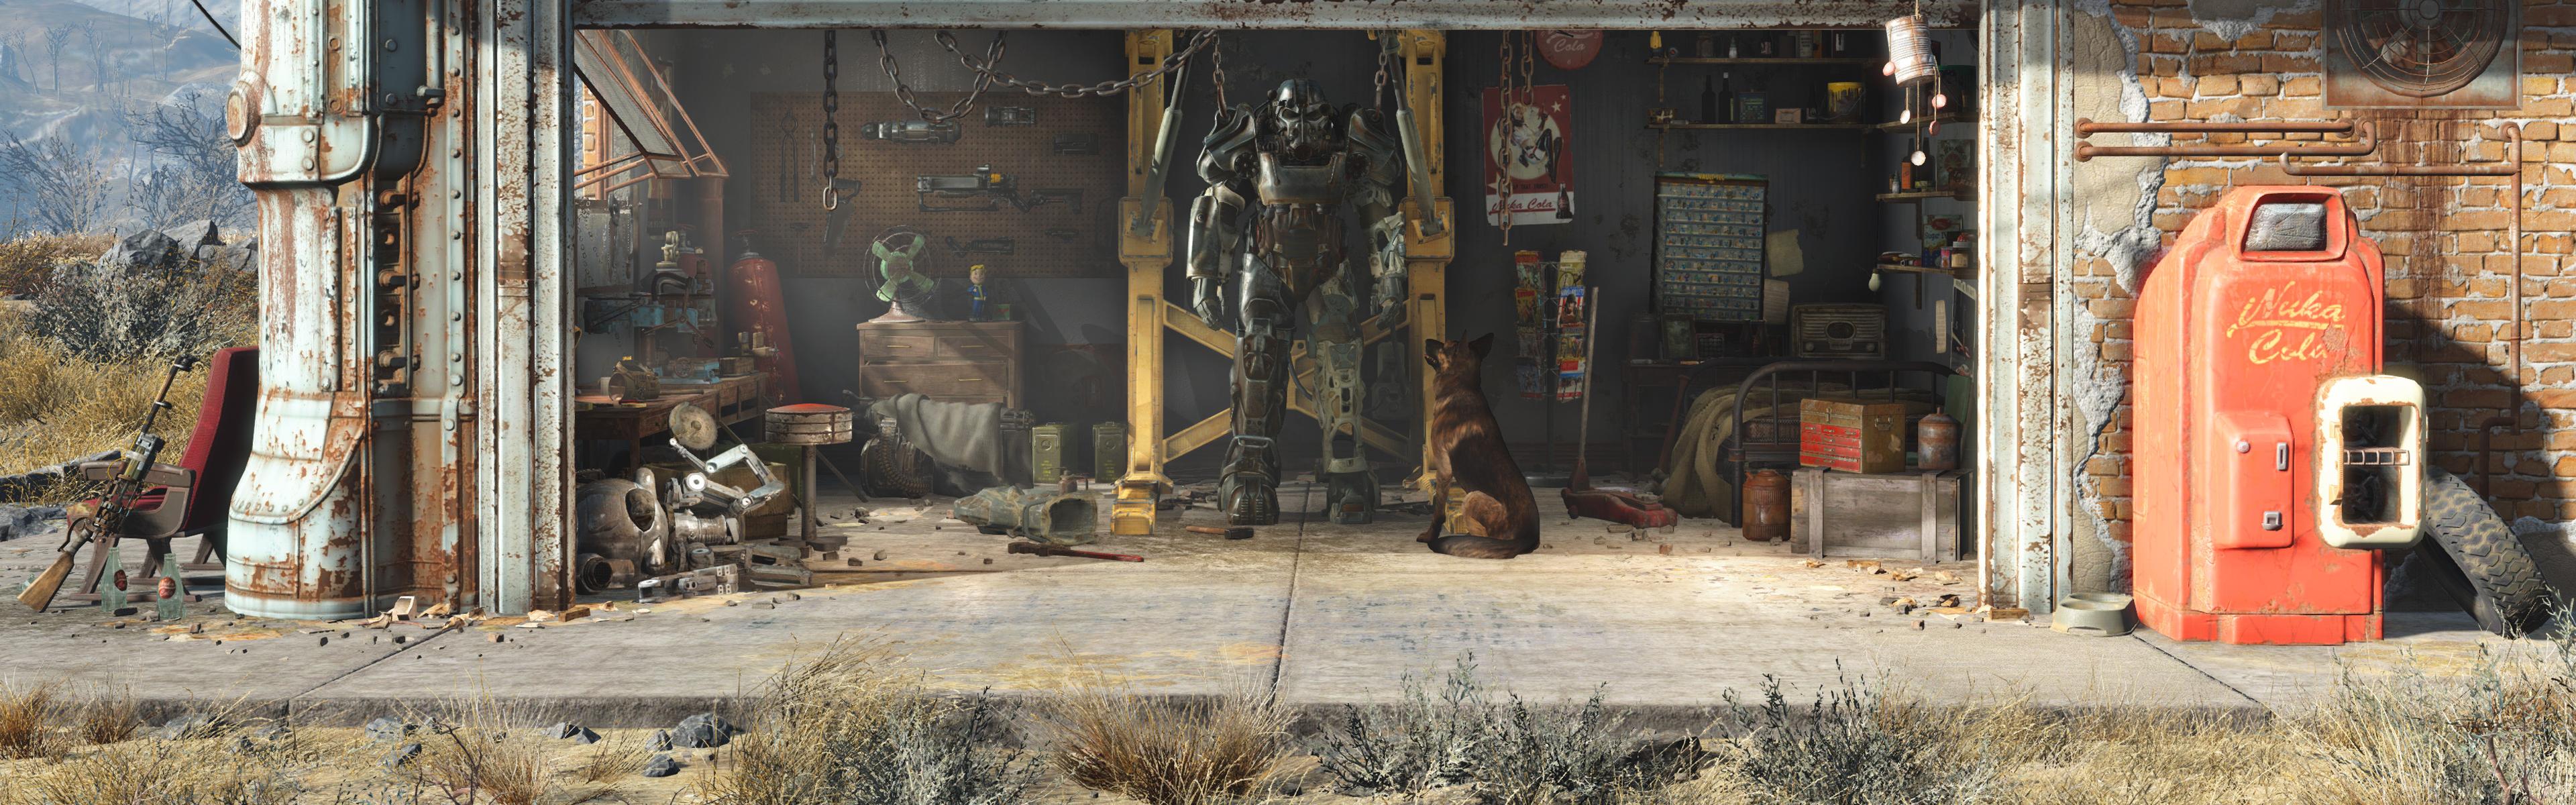 Request For Fallout R Multiwall